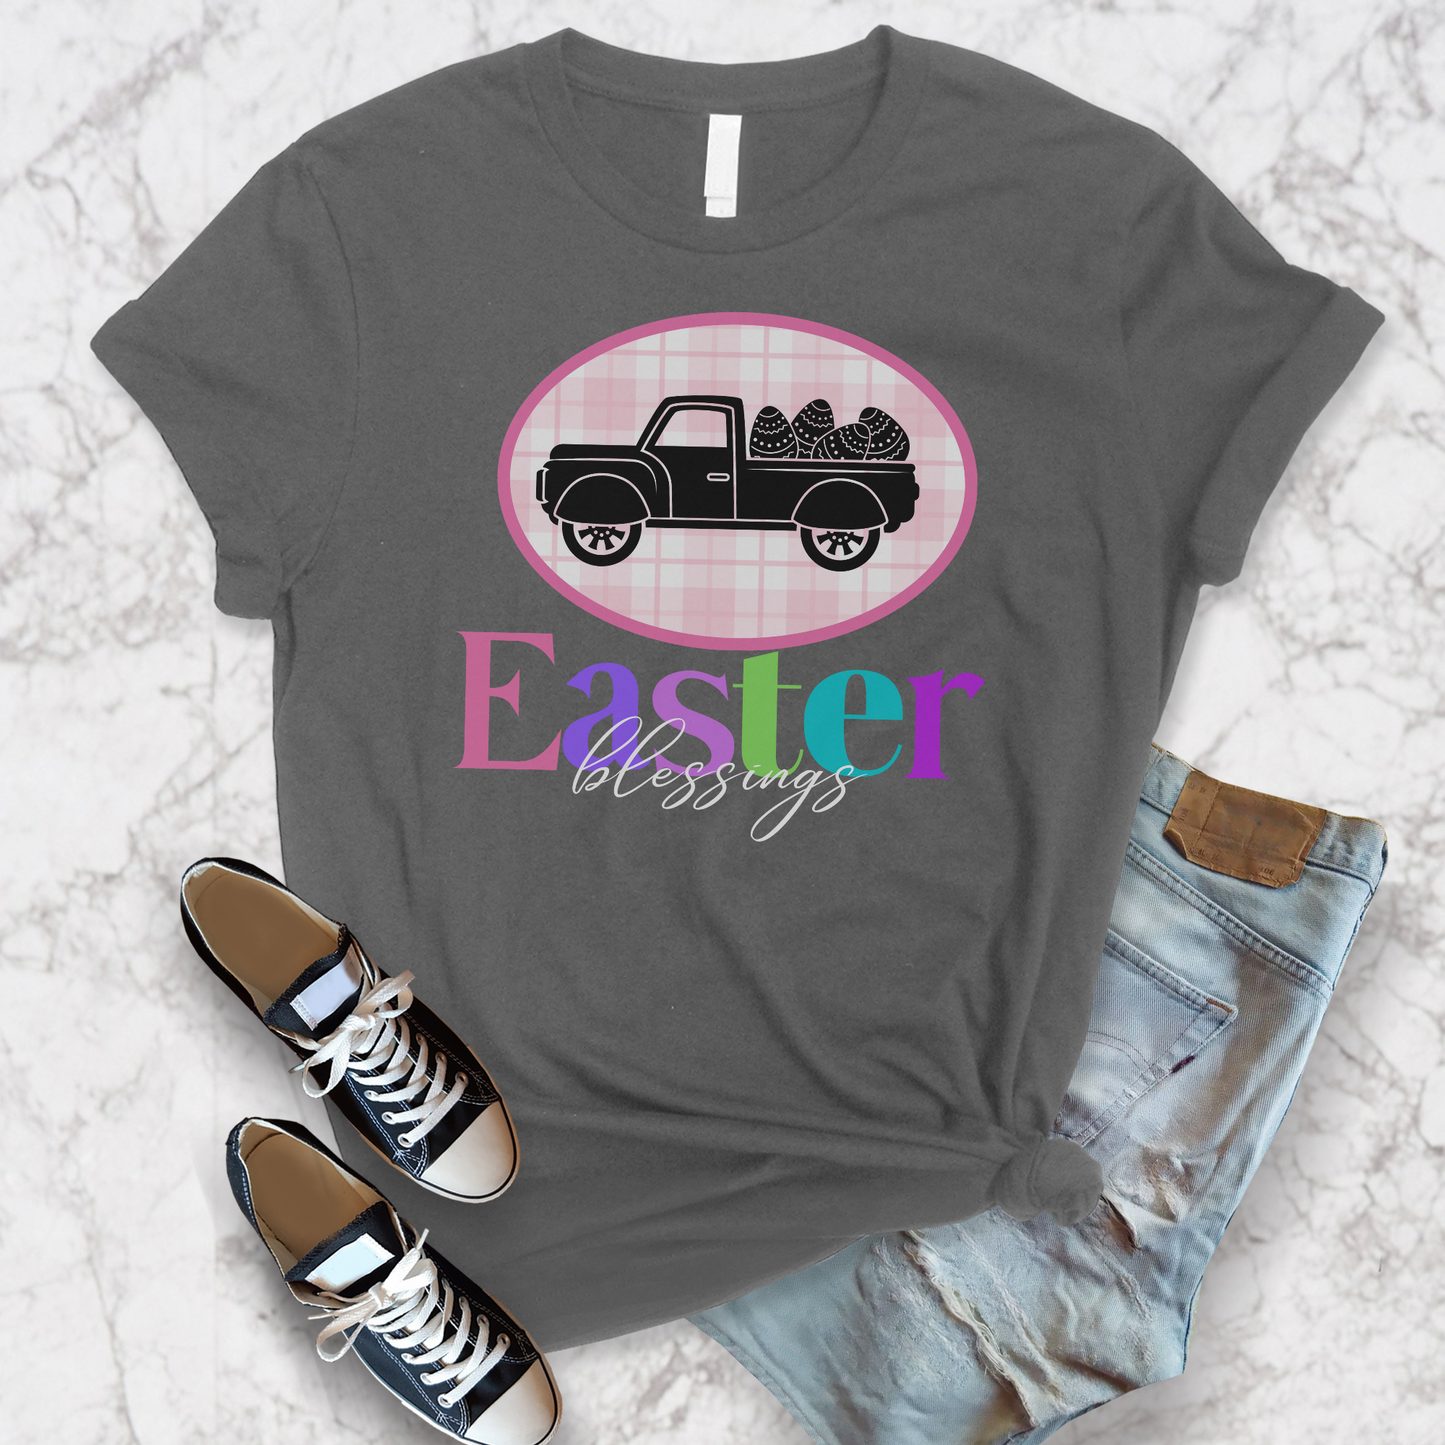 Easter Blessings Pickup Truck with Decorated Eggs Gingham Unisex Jersey Short Sleeve Tee Small-3XL